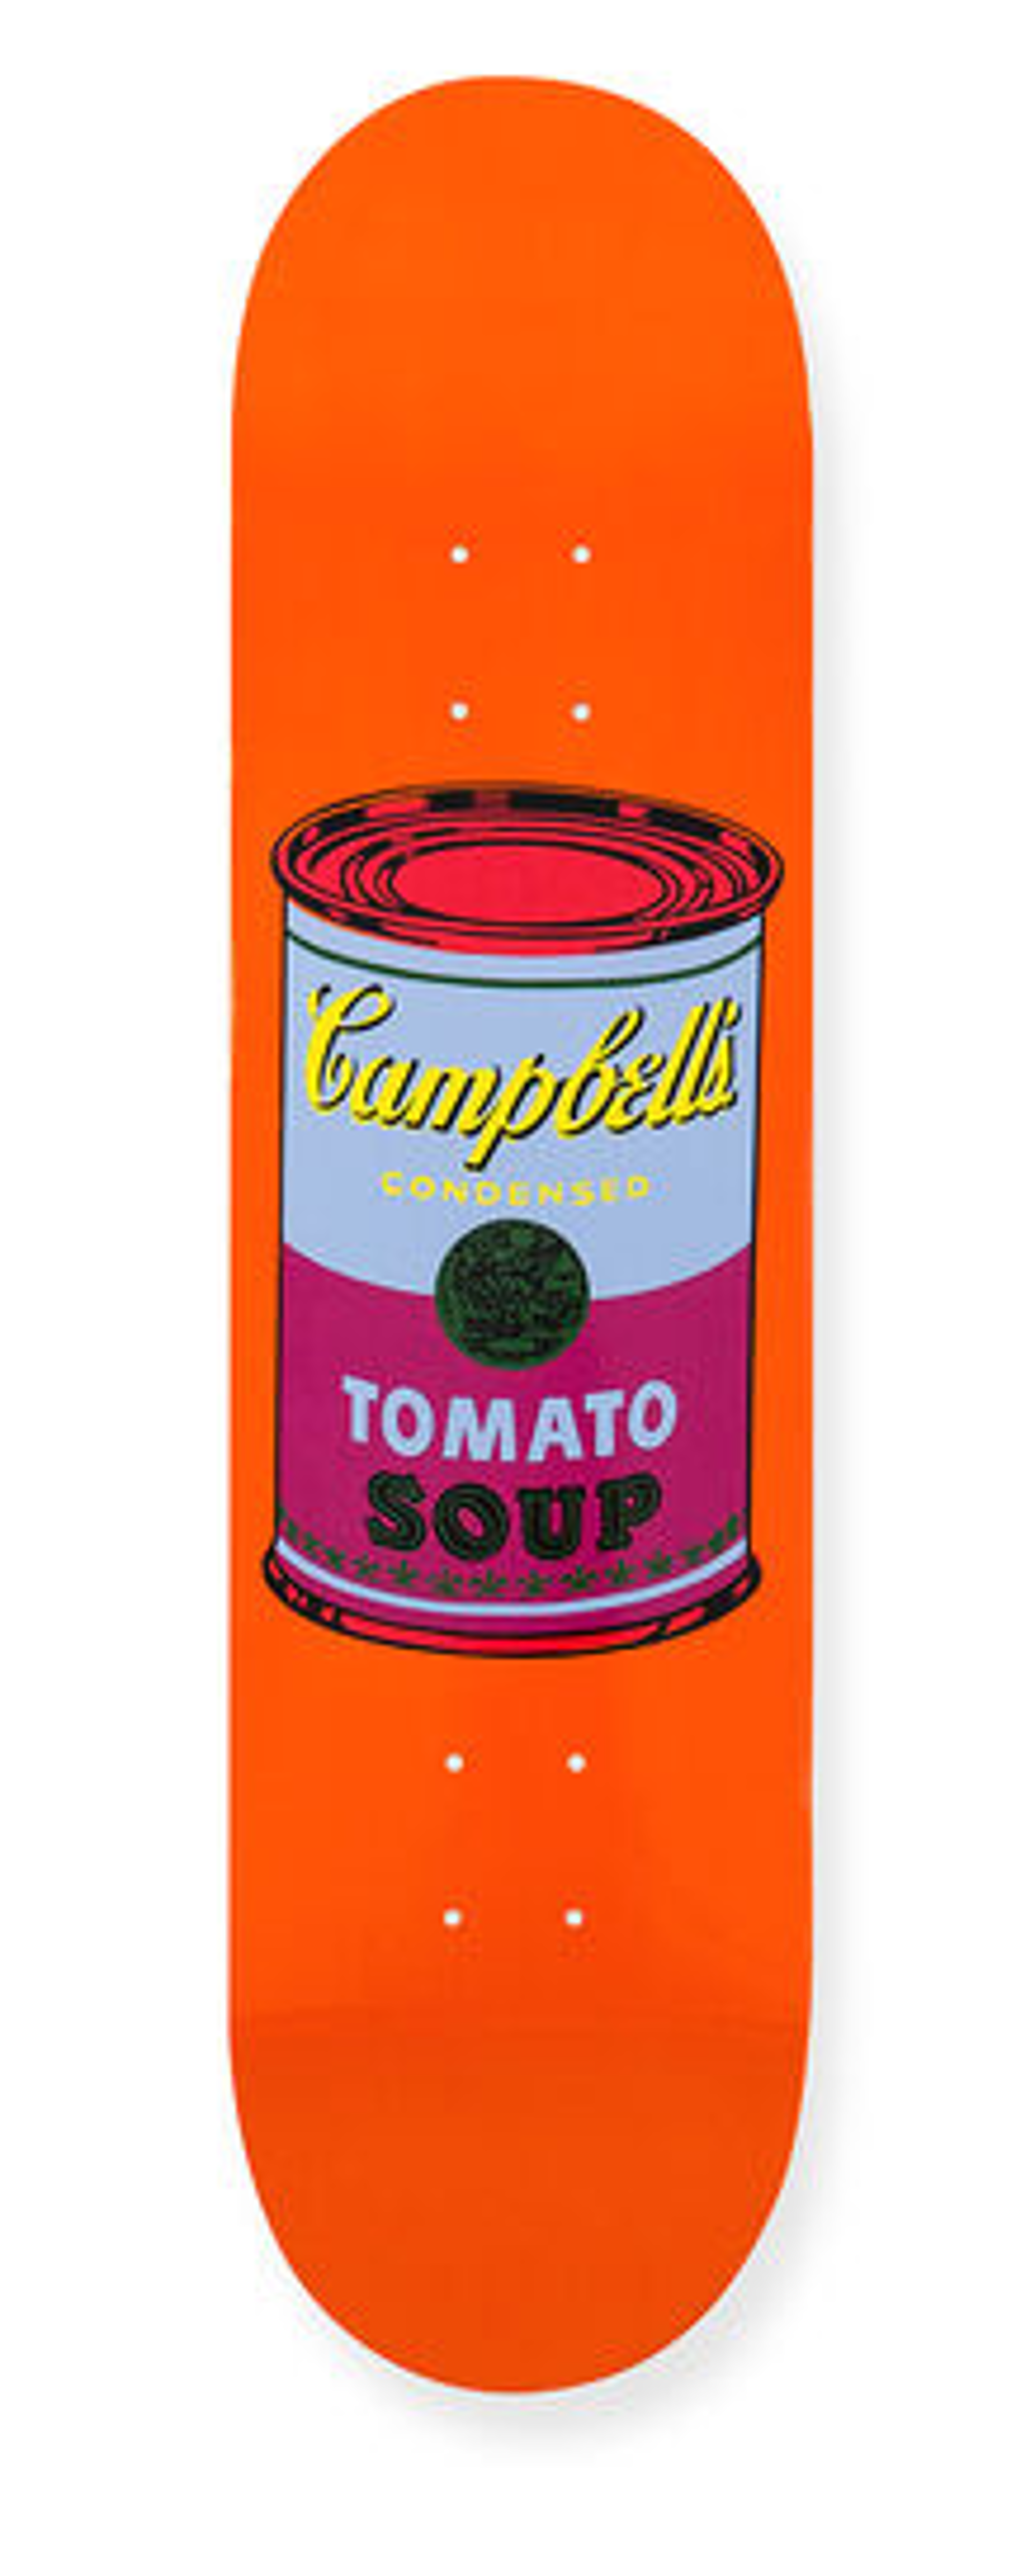 Campbell's Soup Skate Deck (Orange with Red Can) by Andy Warhol